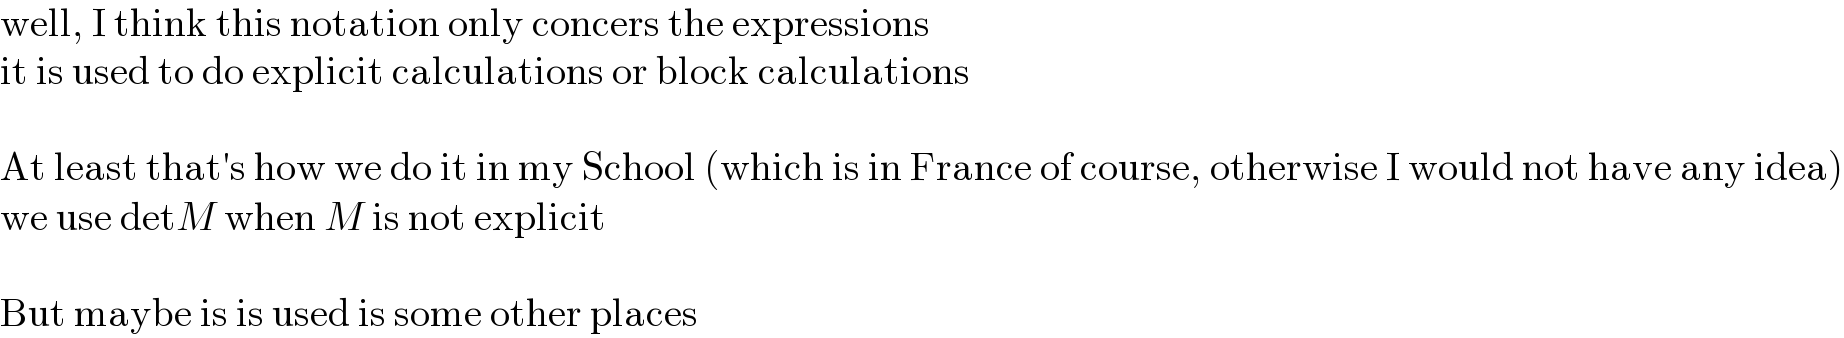 well, I think this notation only concers the expressions  it is used to do explicit calculations or block calculations    At least that′s how we do it in my School (which is in France of course, otherwise I would not have any idea)  we use detM when M is not explicit    But maybe is is used is some other places  